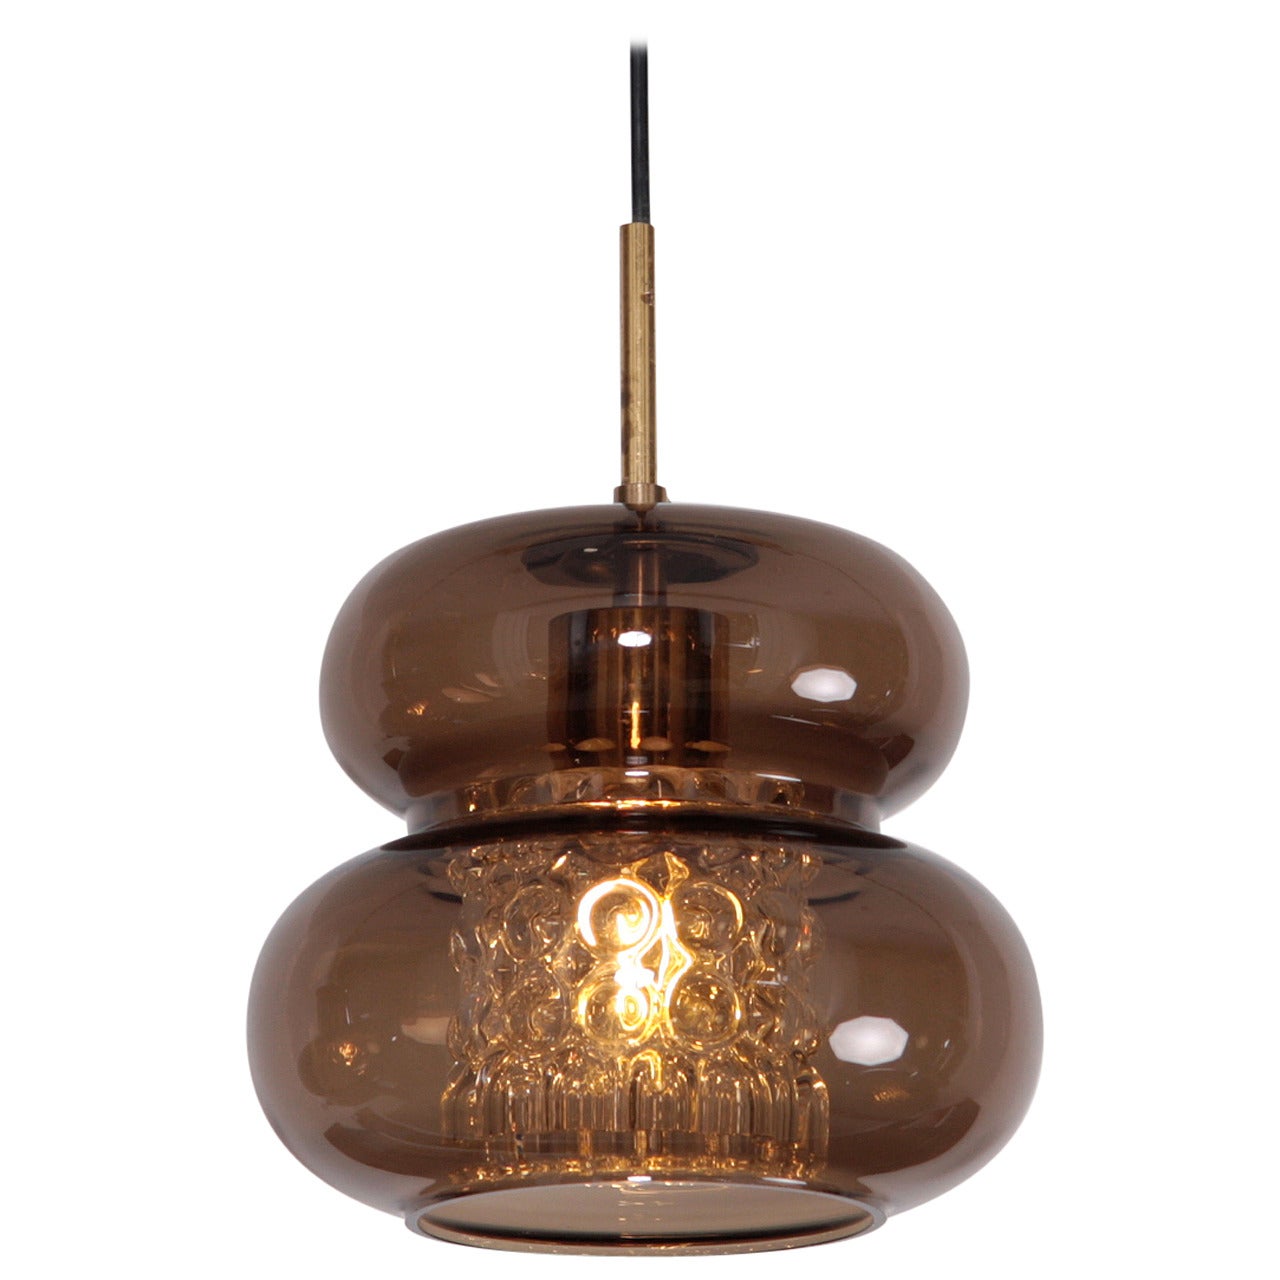 Pendant by Carl Fagerlund for Orrefors in Brown and Bubble Glass Piece